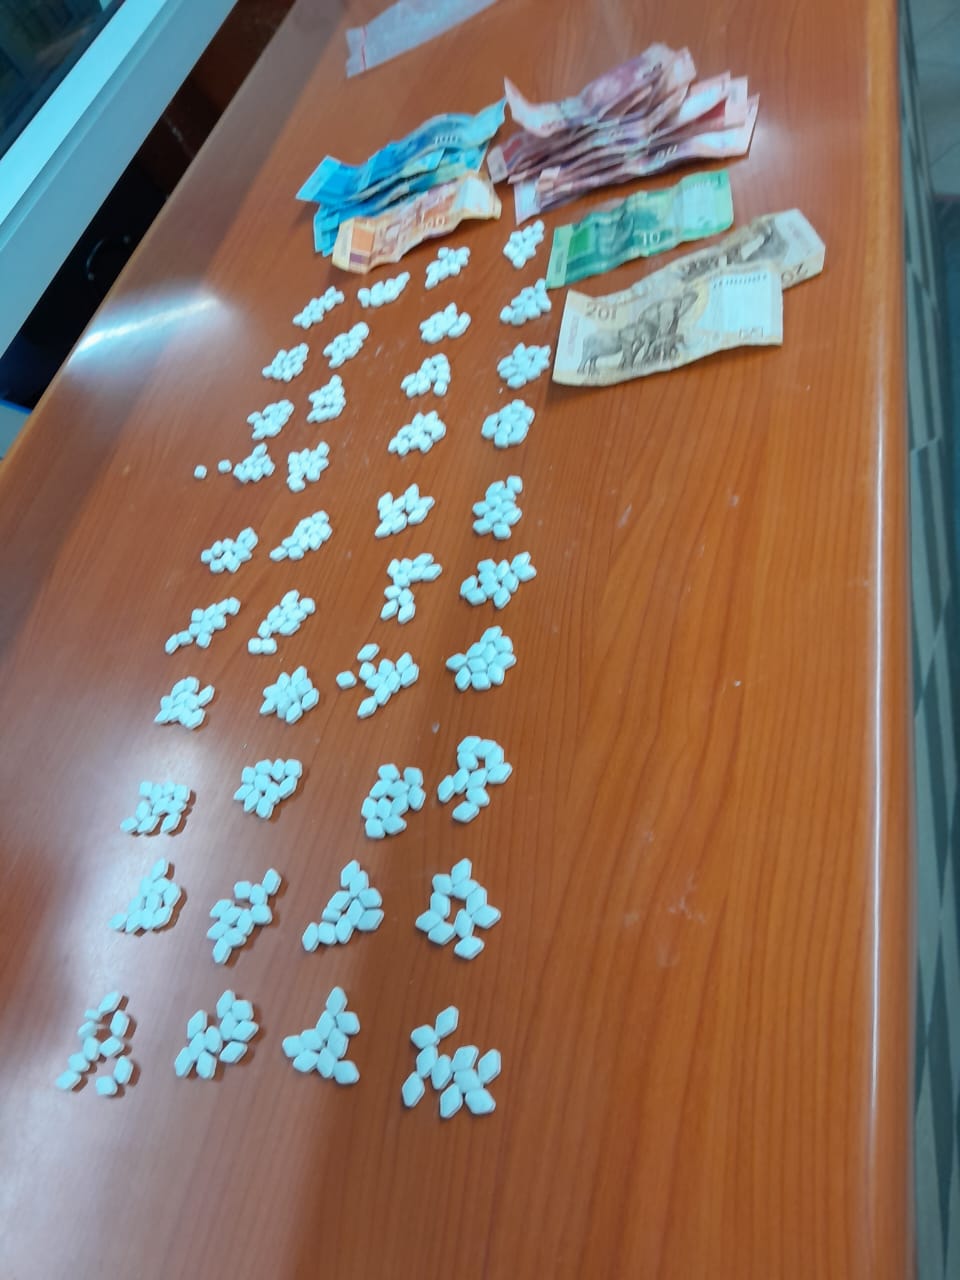 Police arrest suspects for the possession of ecstasy tablets